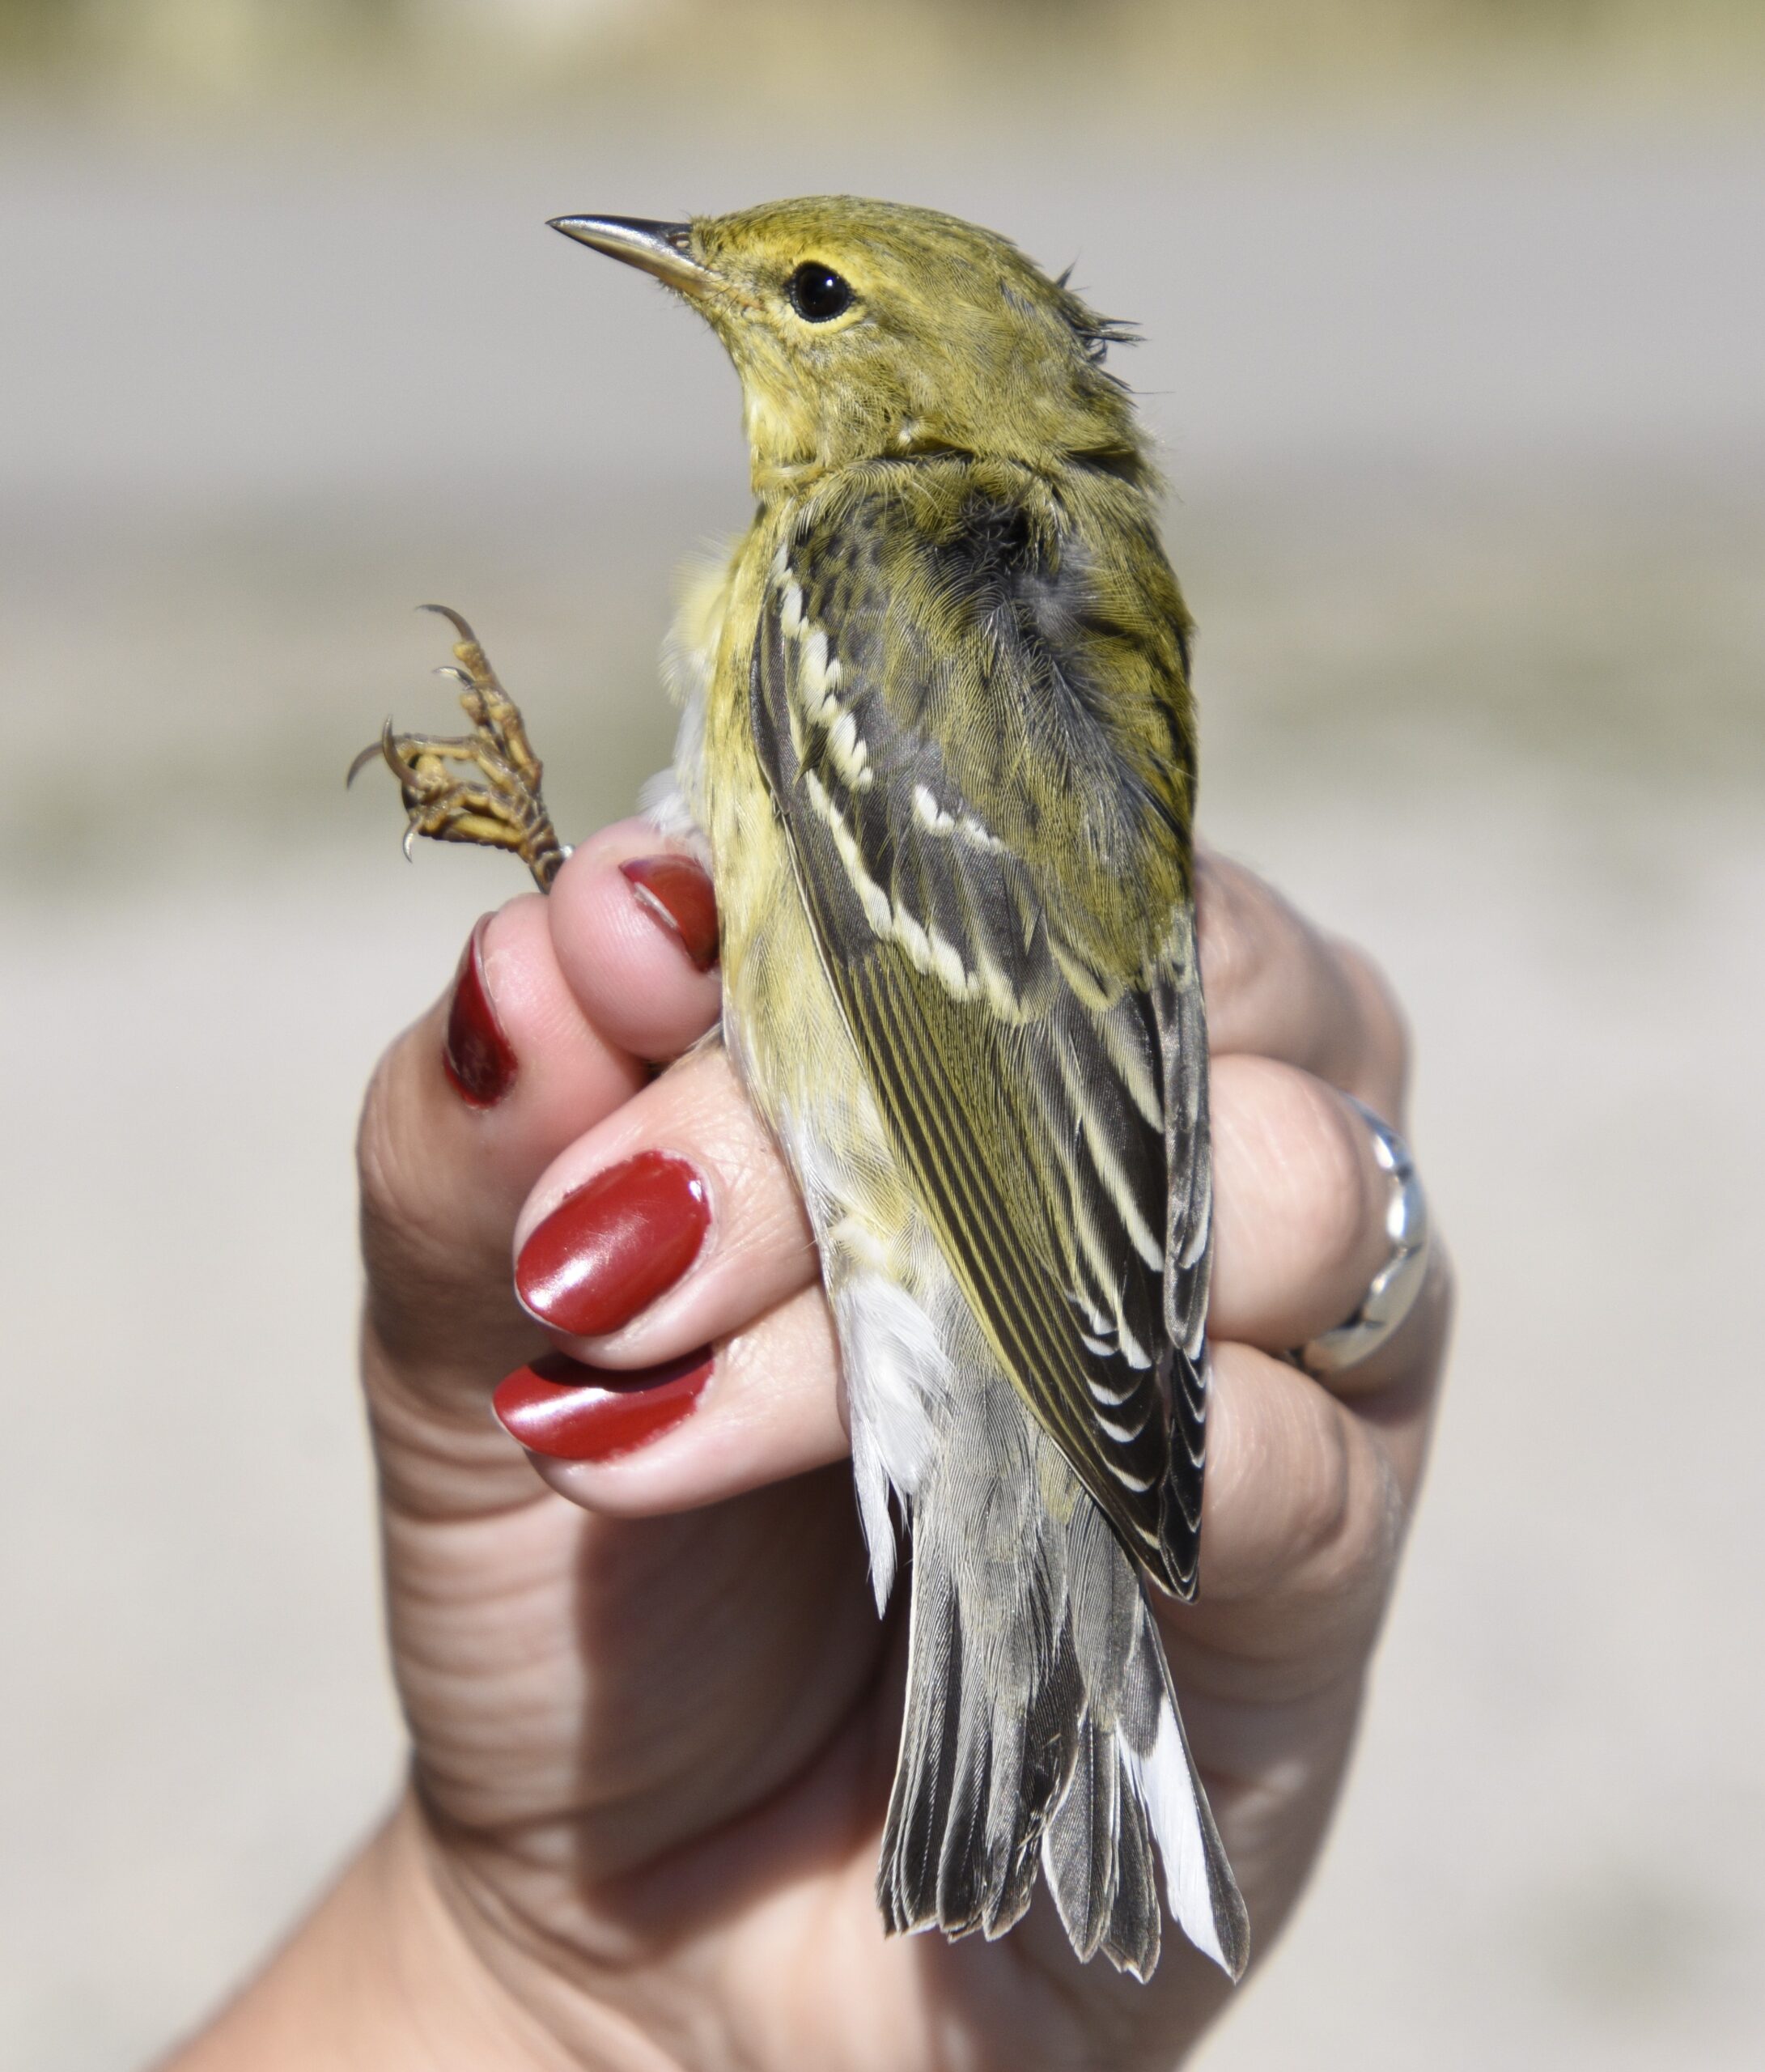 A small yellowish bird with black on it's wings being held in photographer's grip 